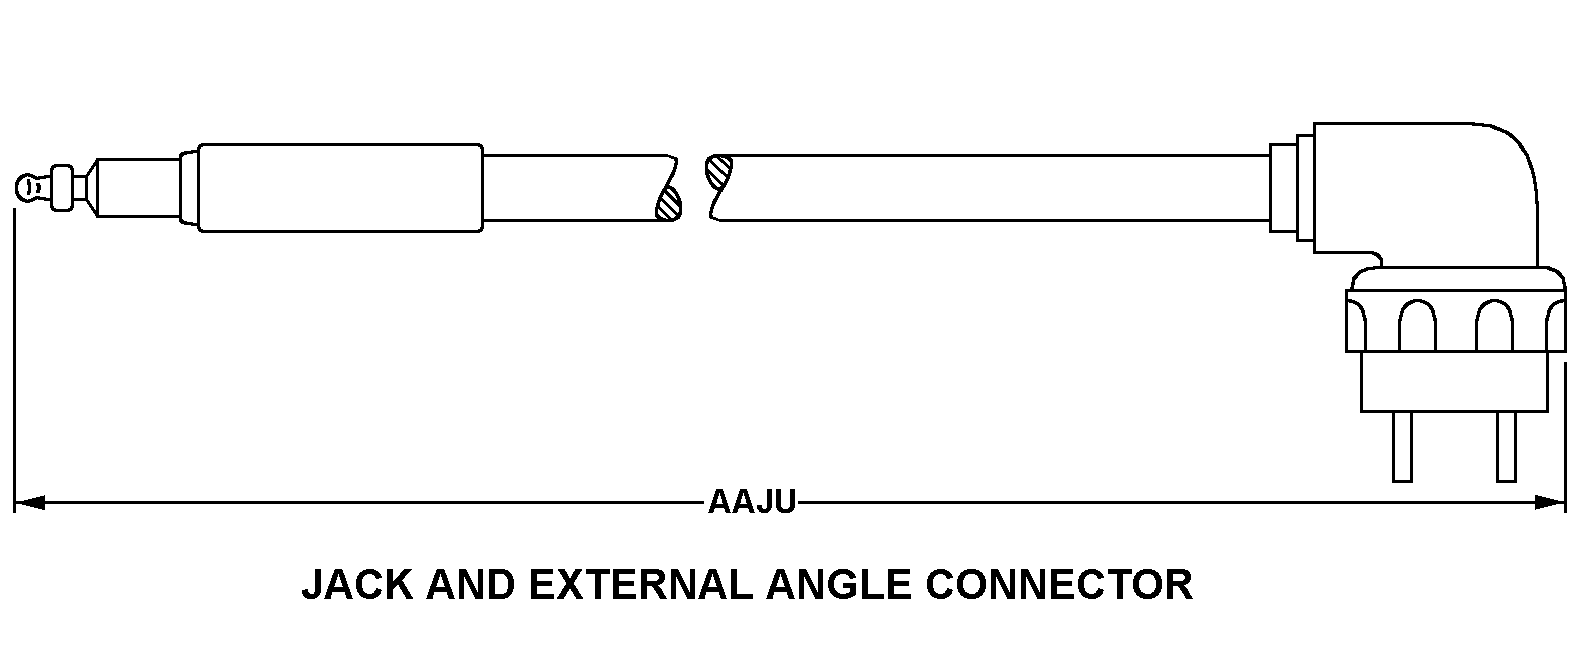 JACK AND EXTERNAL ANGLE CONNECTOR style nsn 6150-01-067-7105